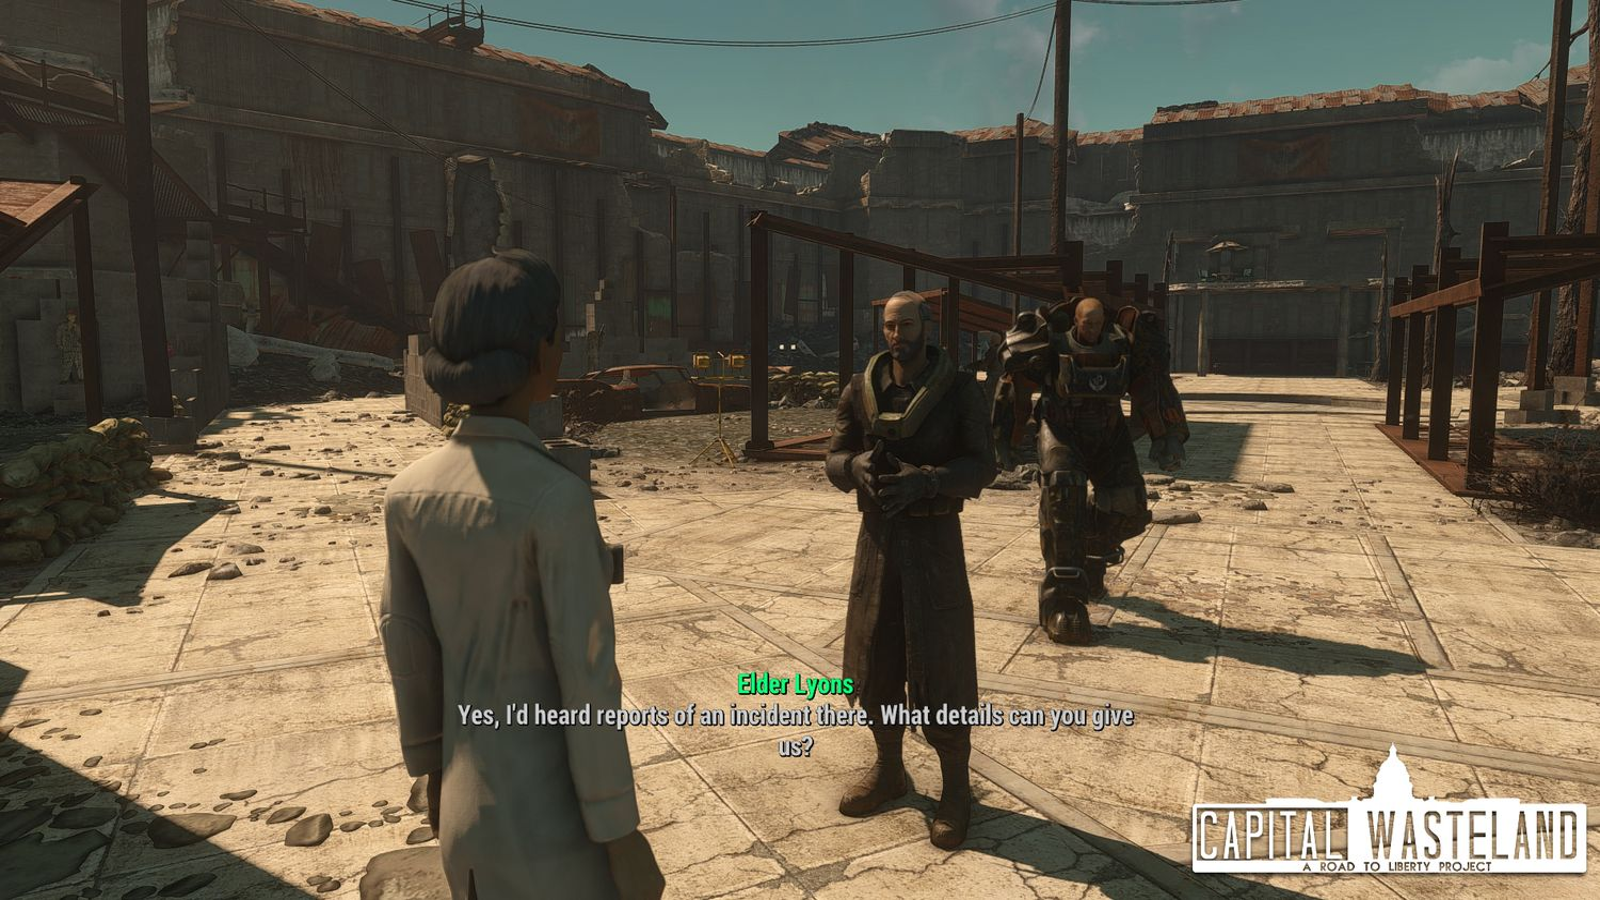 Capital Wasteland, the Fallout 3 remake in Fallout 4, has resumed  development